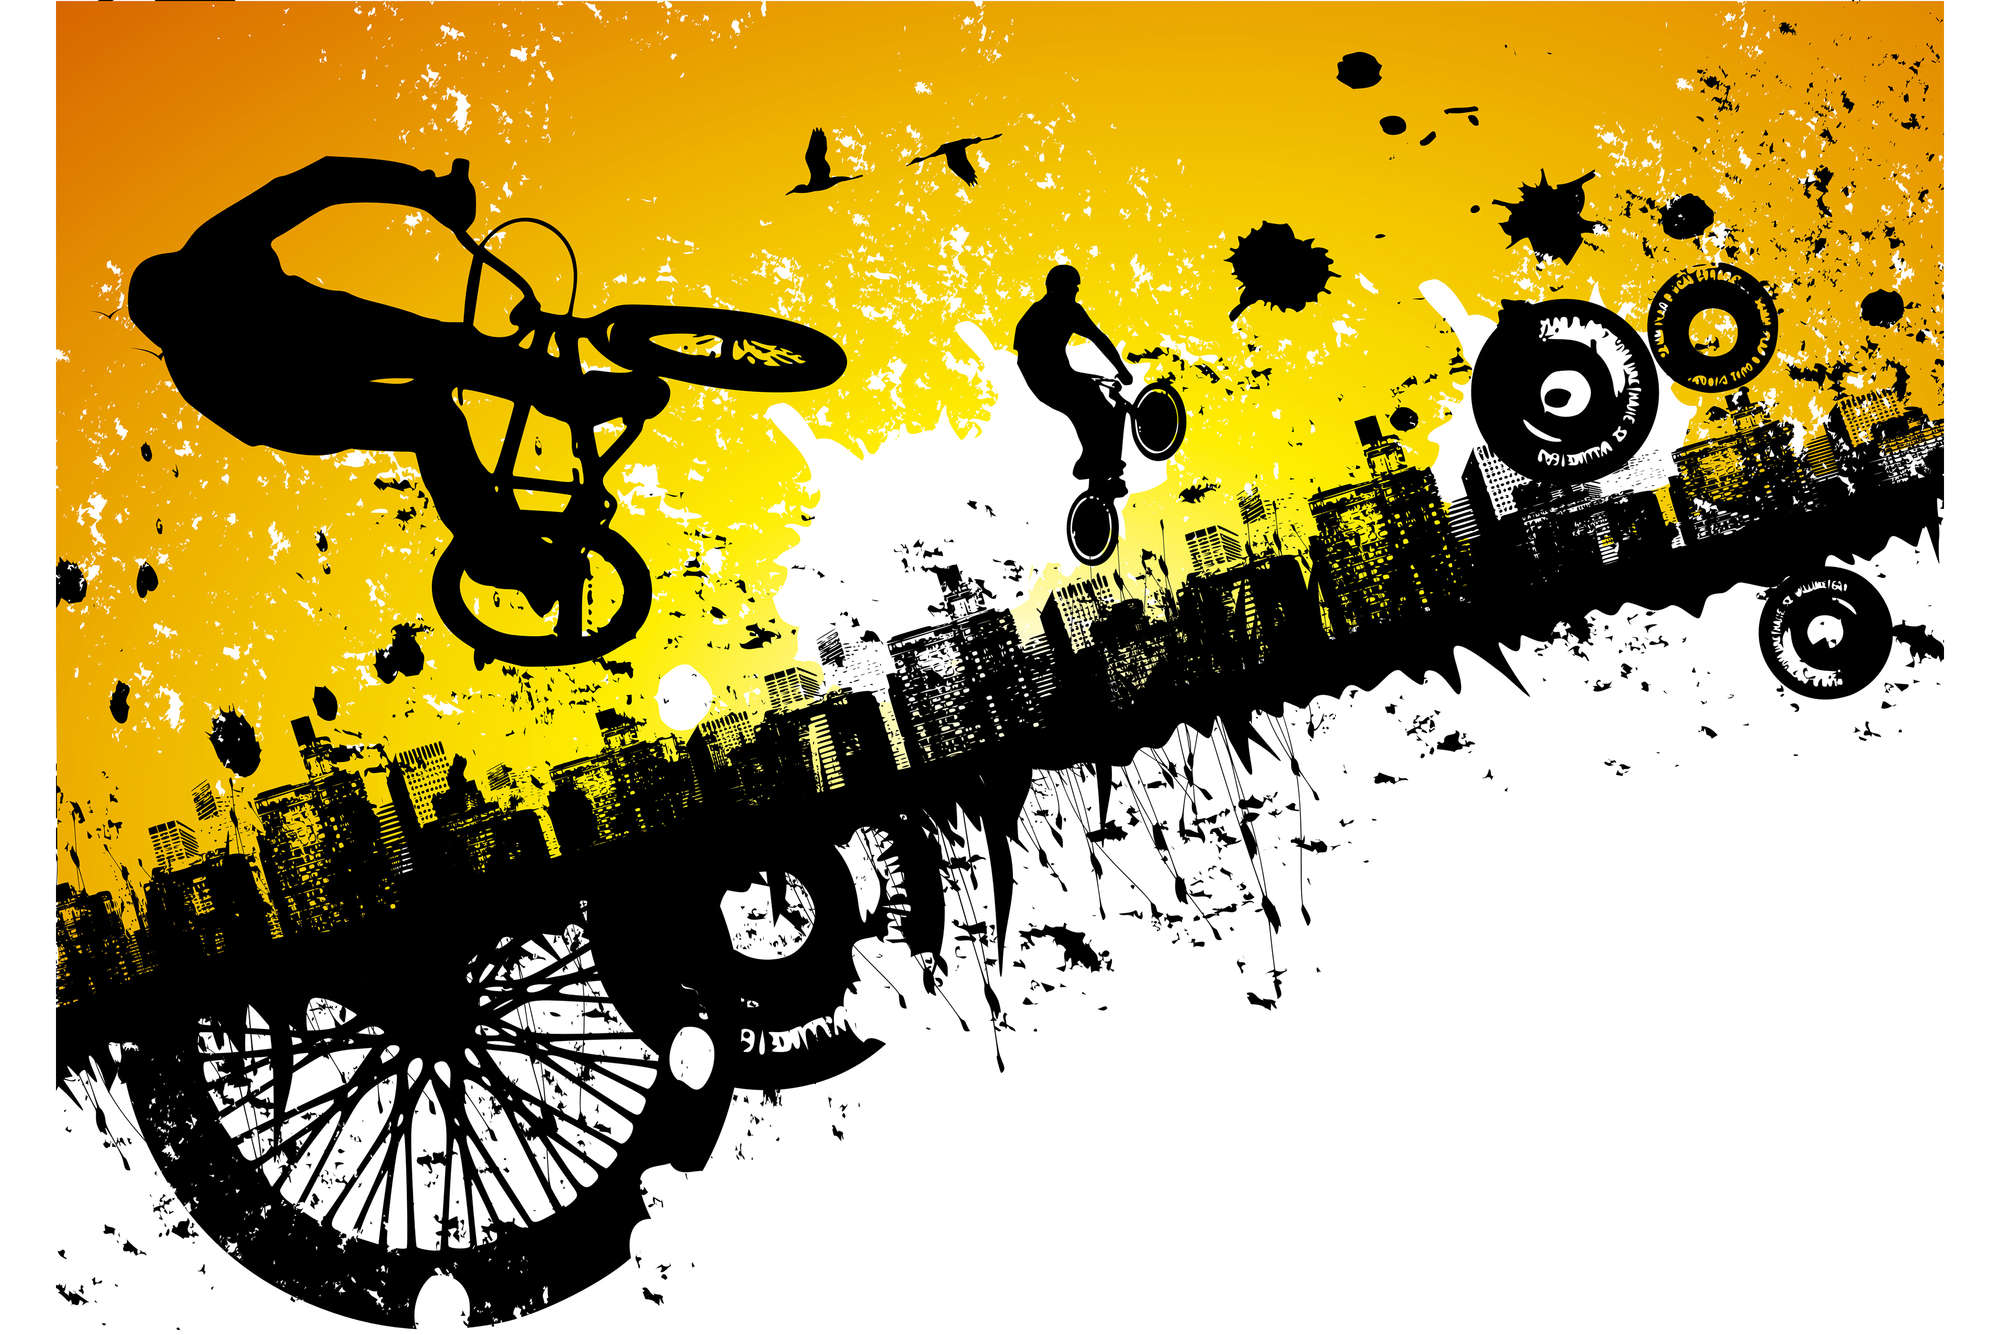             Bicycle Rider with BMX Wallpaper - Textured Non-woven
        